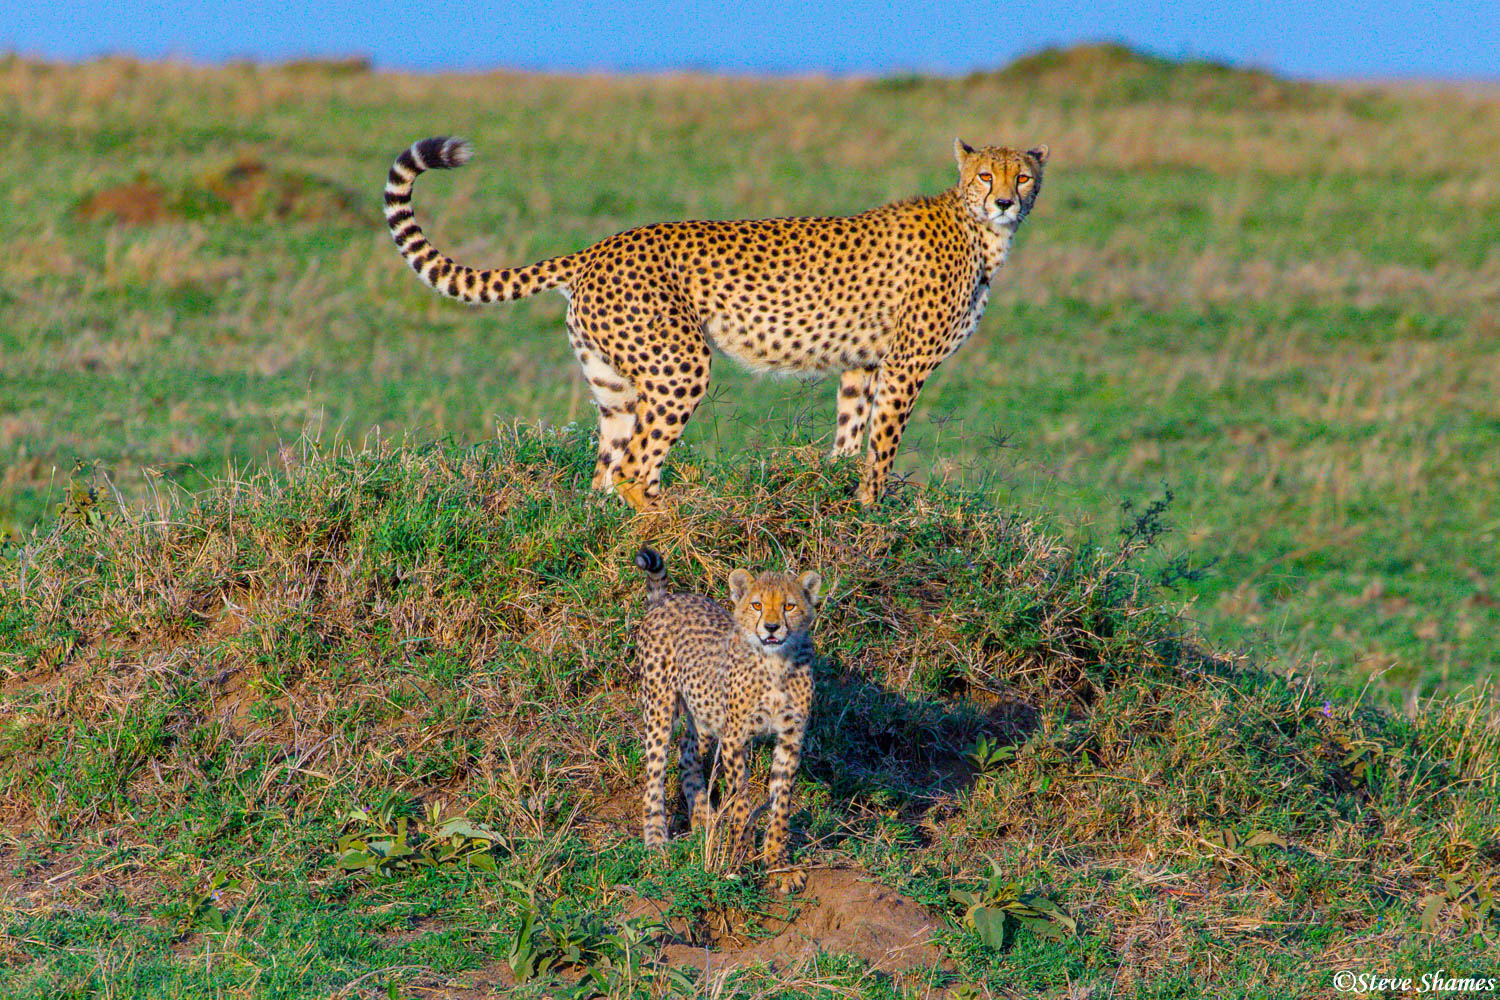 The mother cheetah likes to get high on the termite mound for a good view.